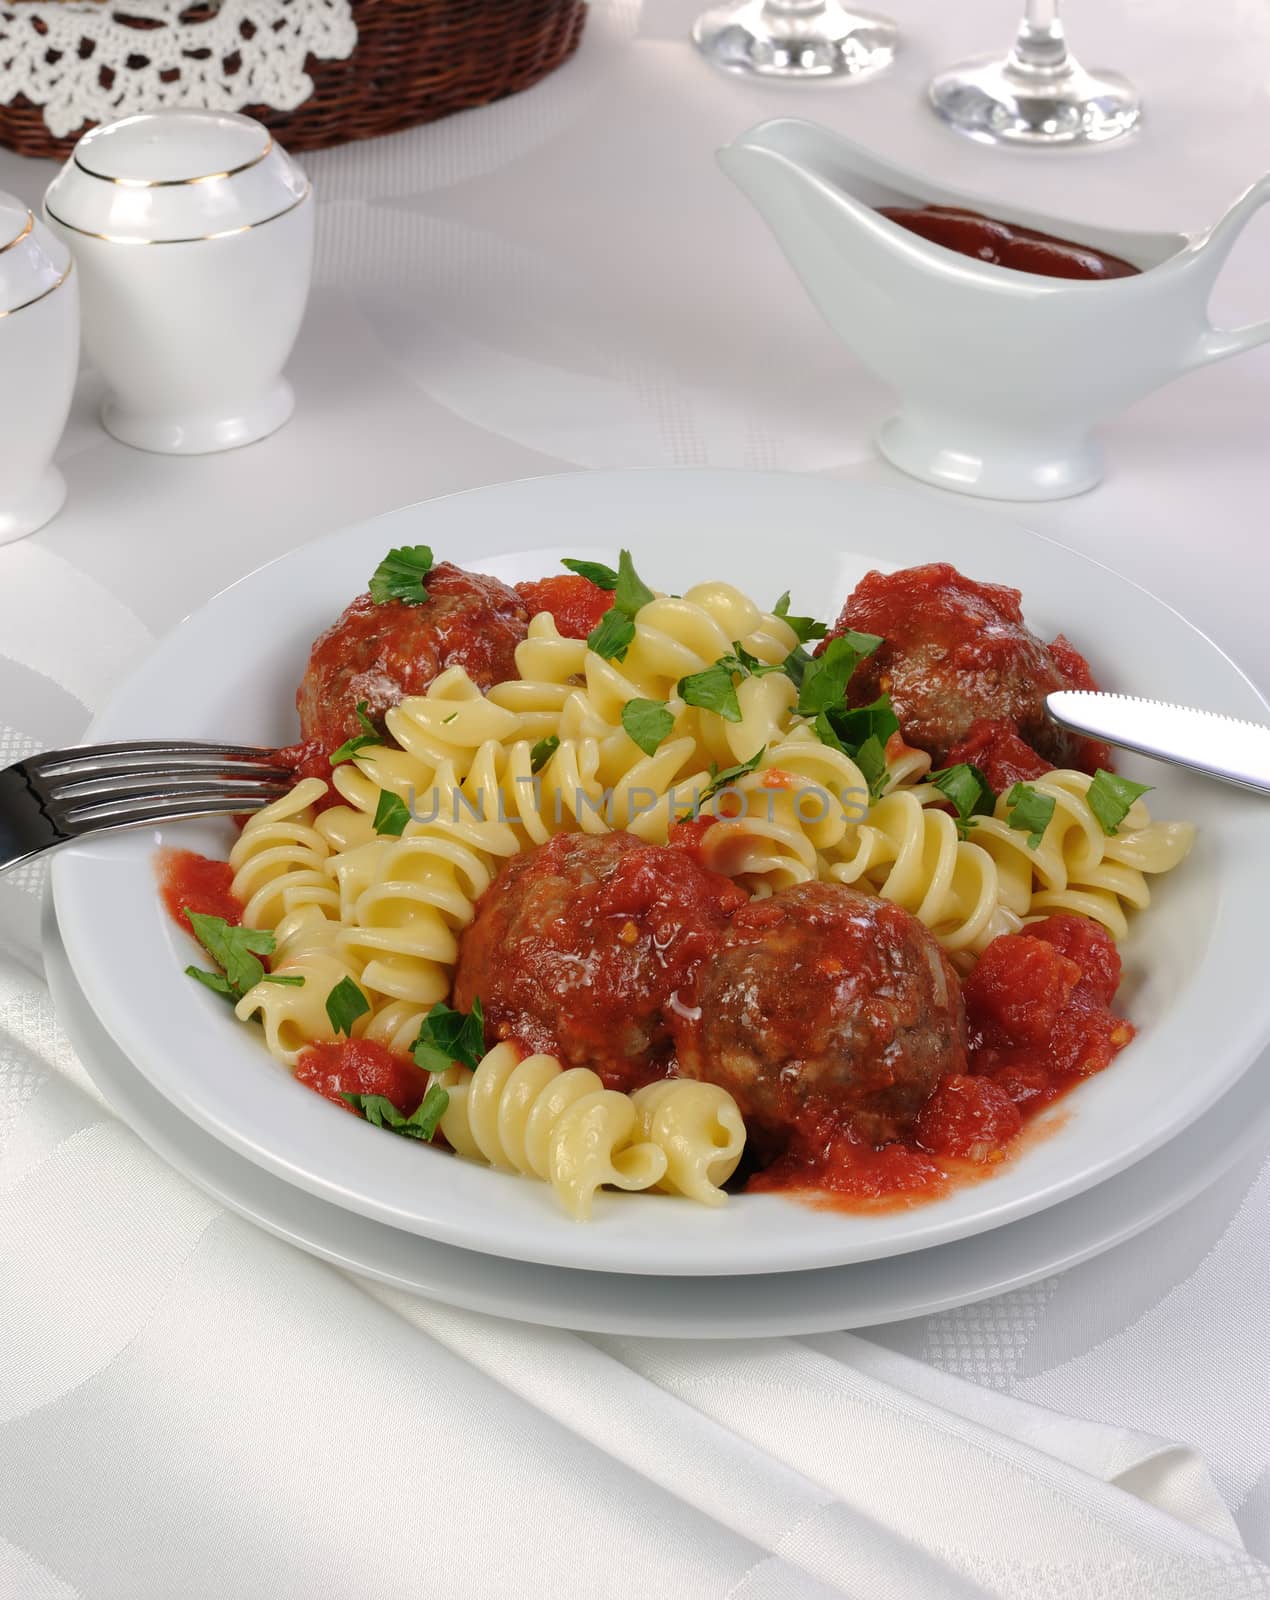 Pasta with meatballs in tomato sauce and herbs